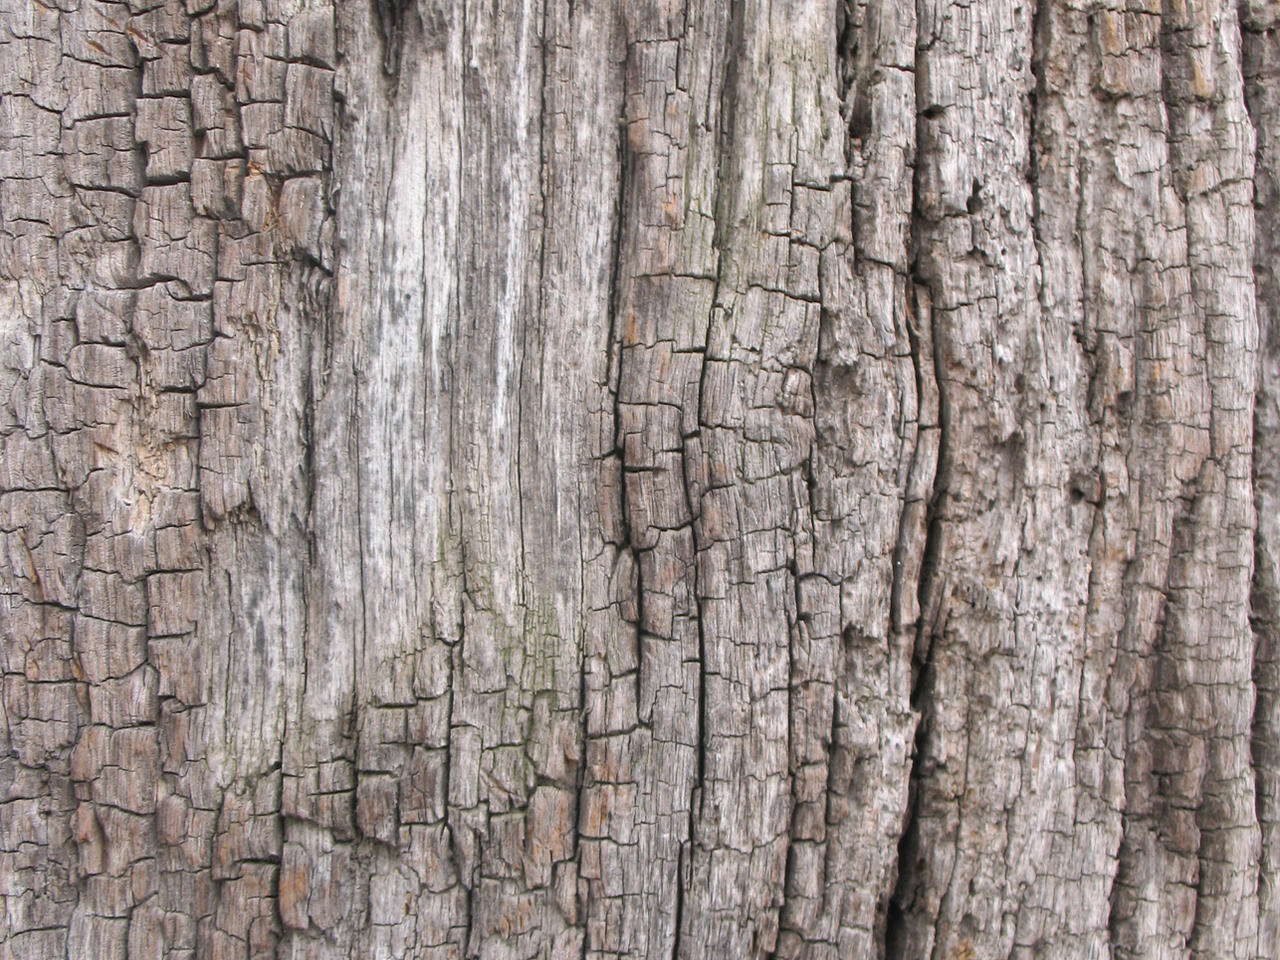 Old Wood texture 3